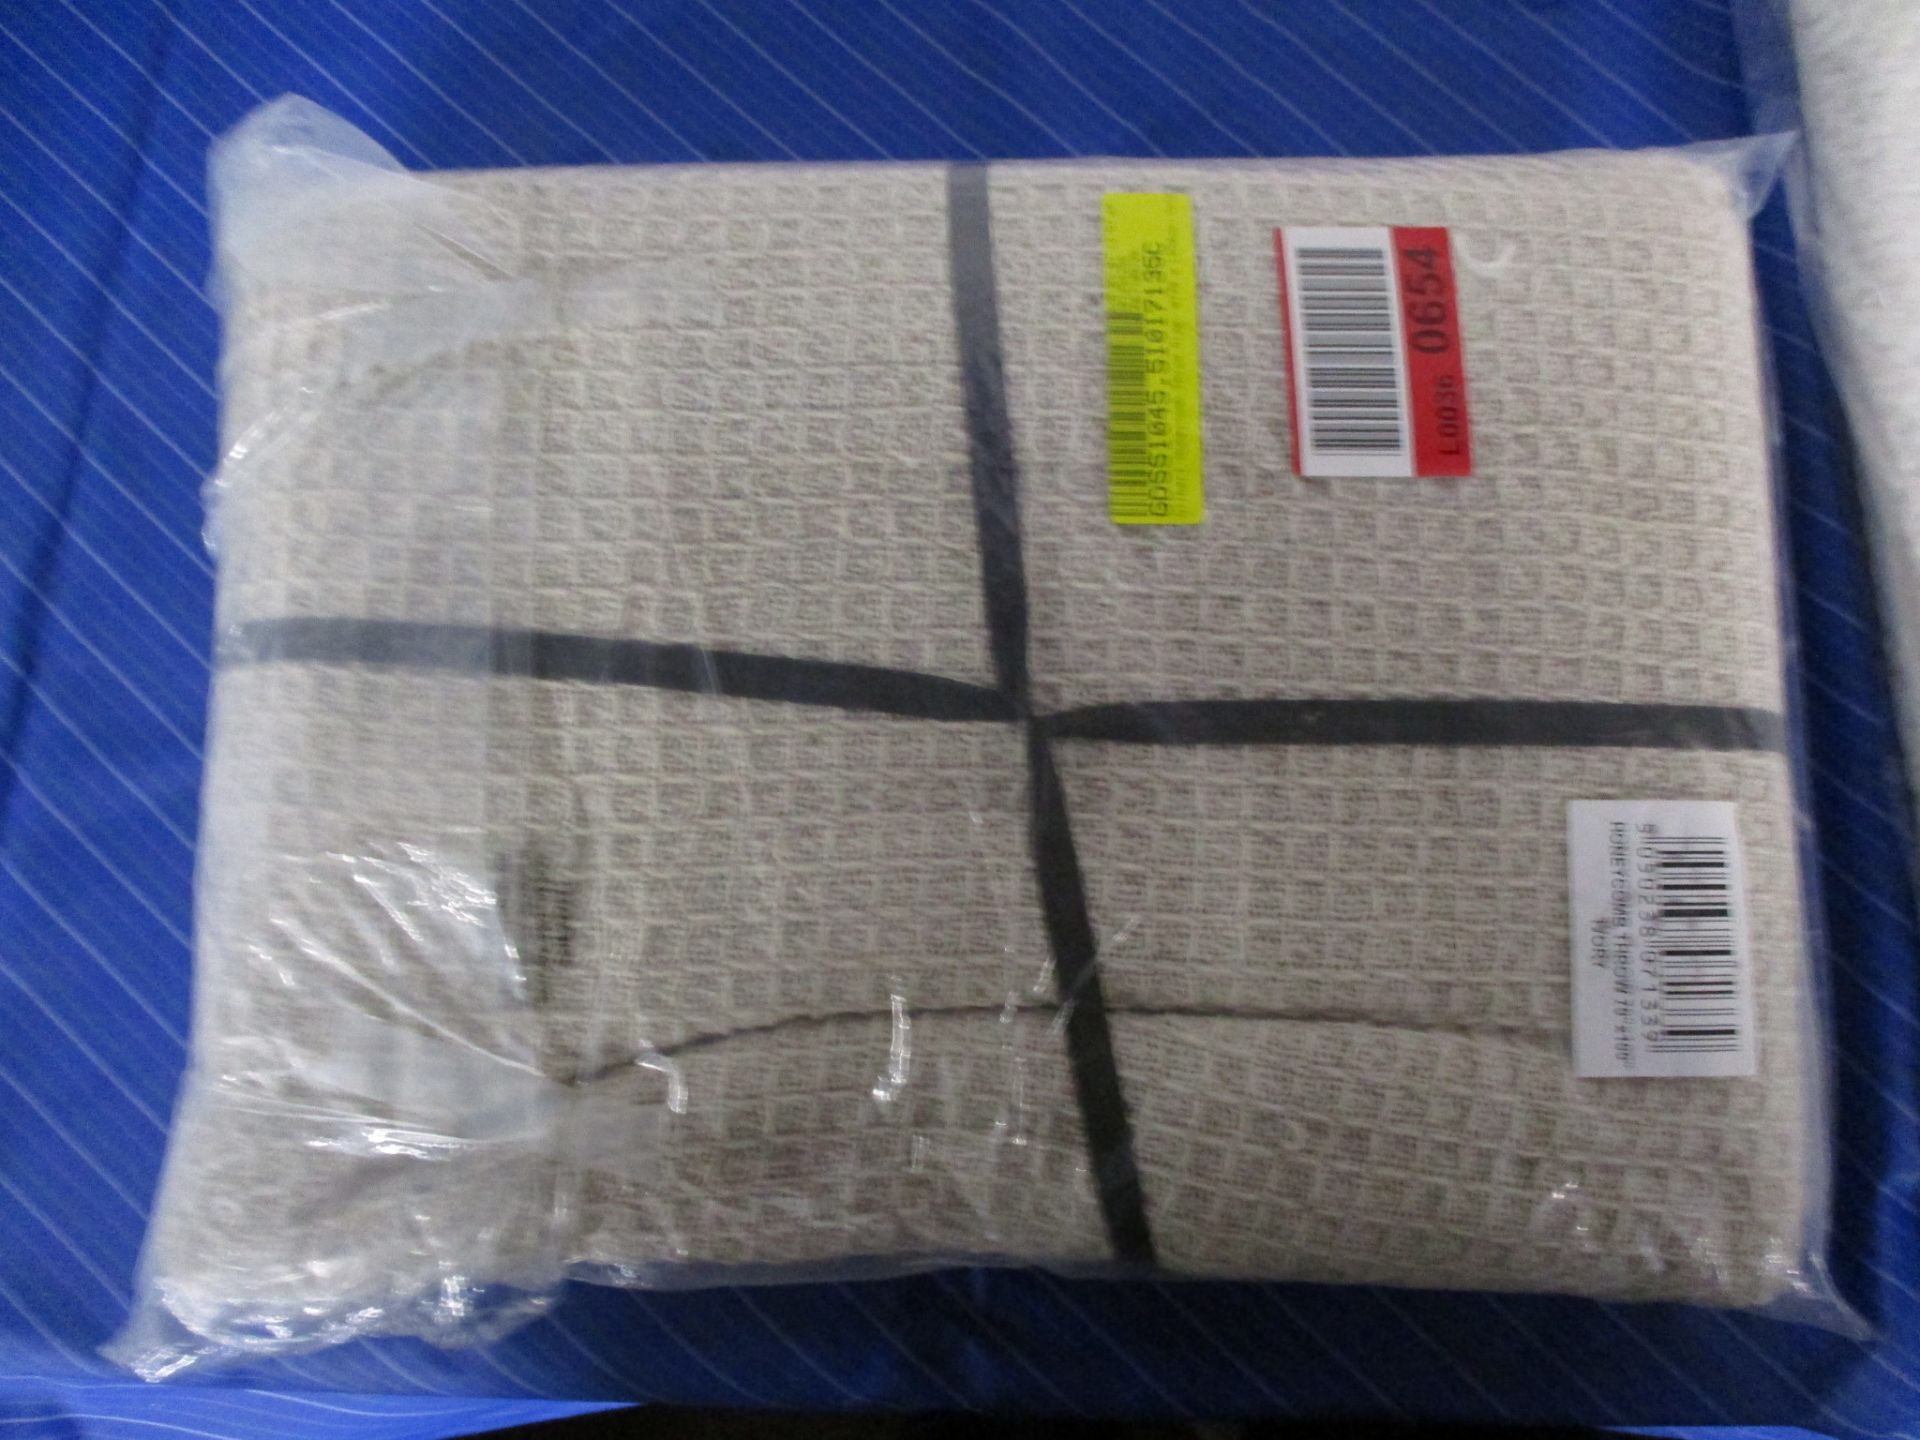 Norden Home Gilbert Honeycomb Throw, Size: W178 x L254cm, Colour: Ivory, RRP £15.99 - Image 2 of 2